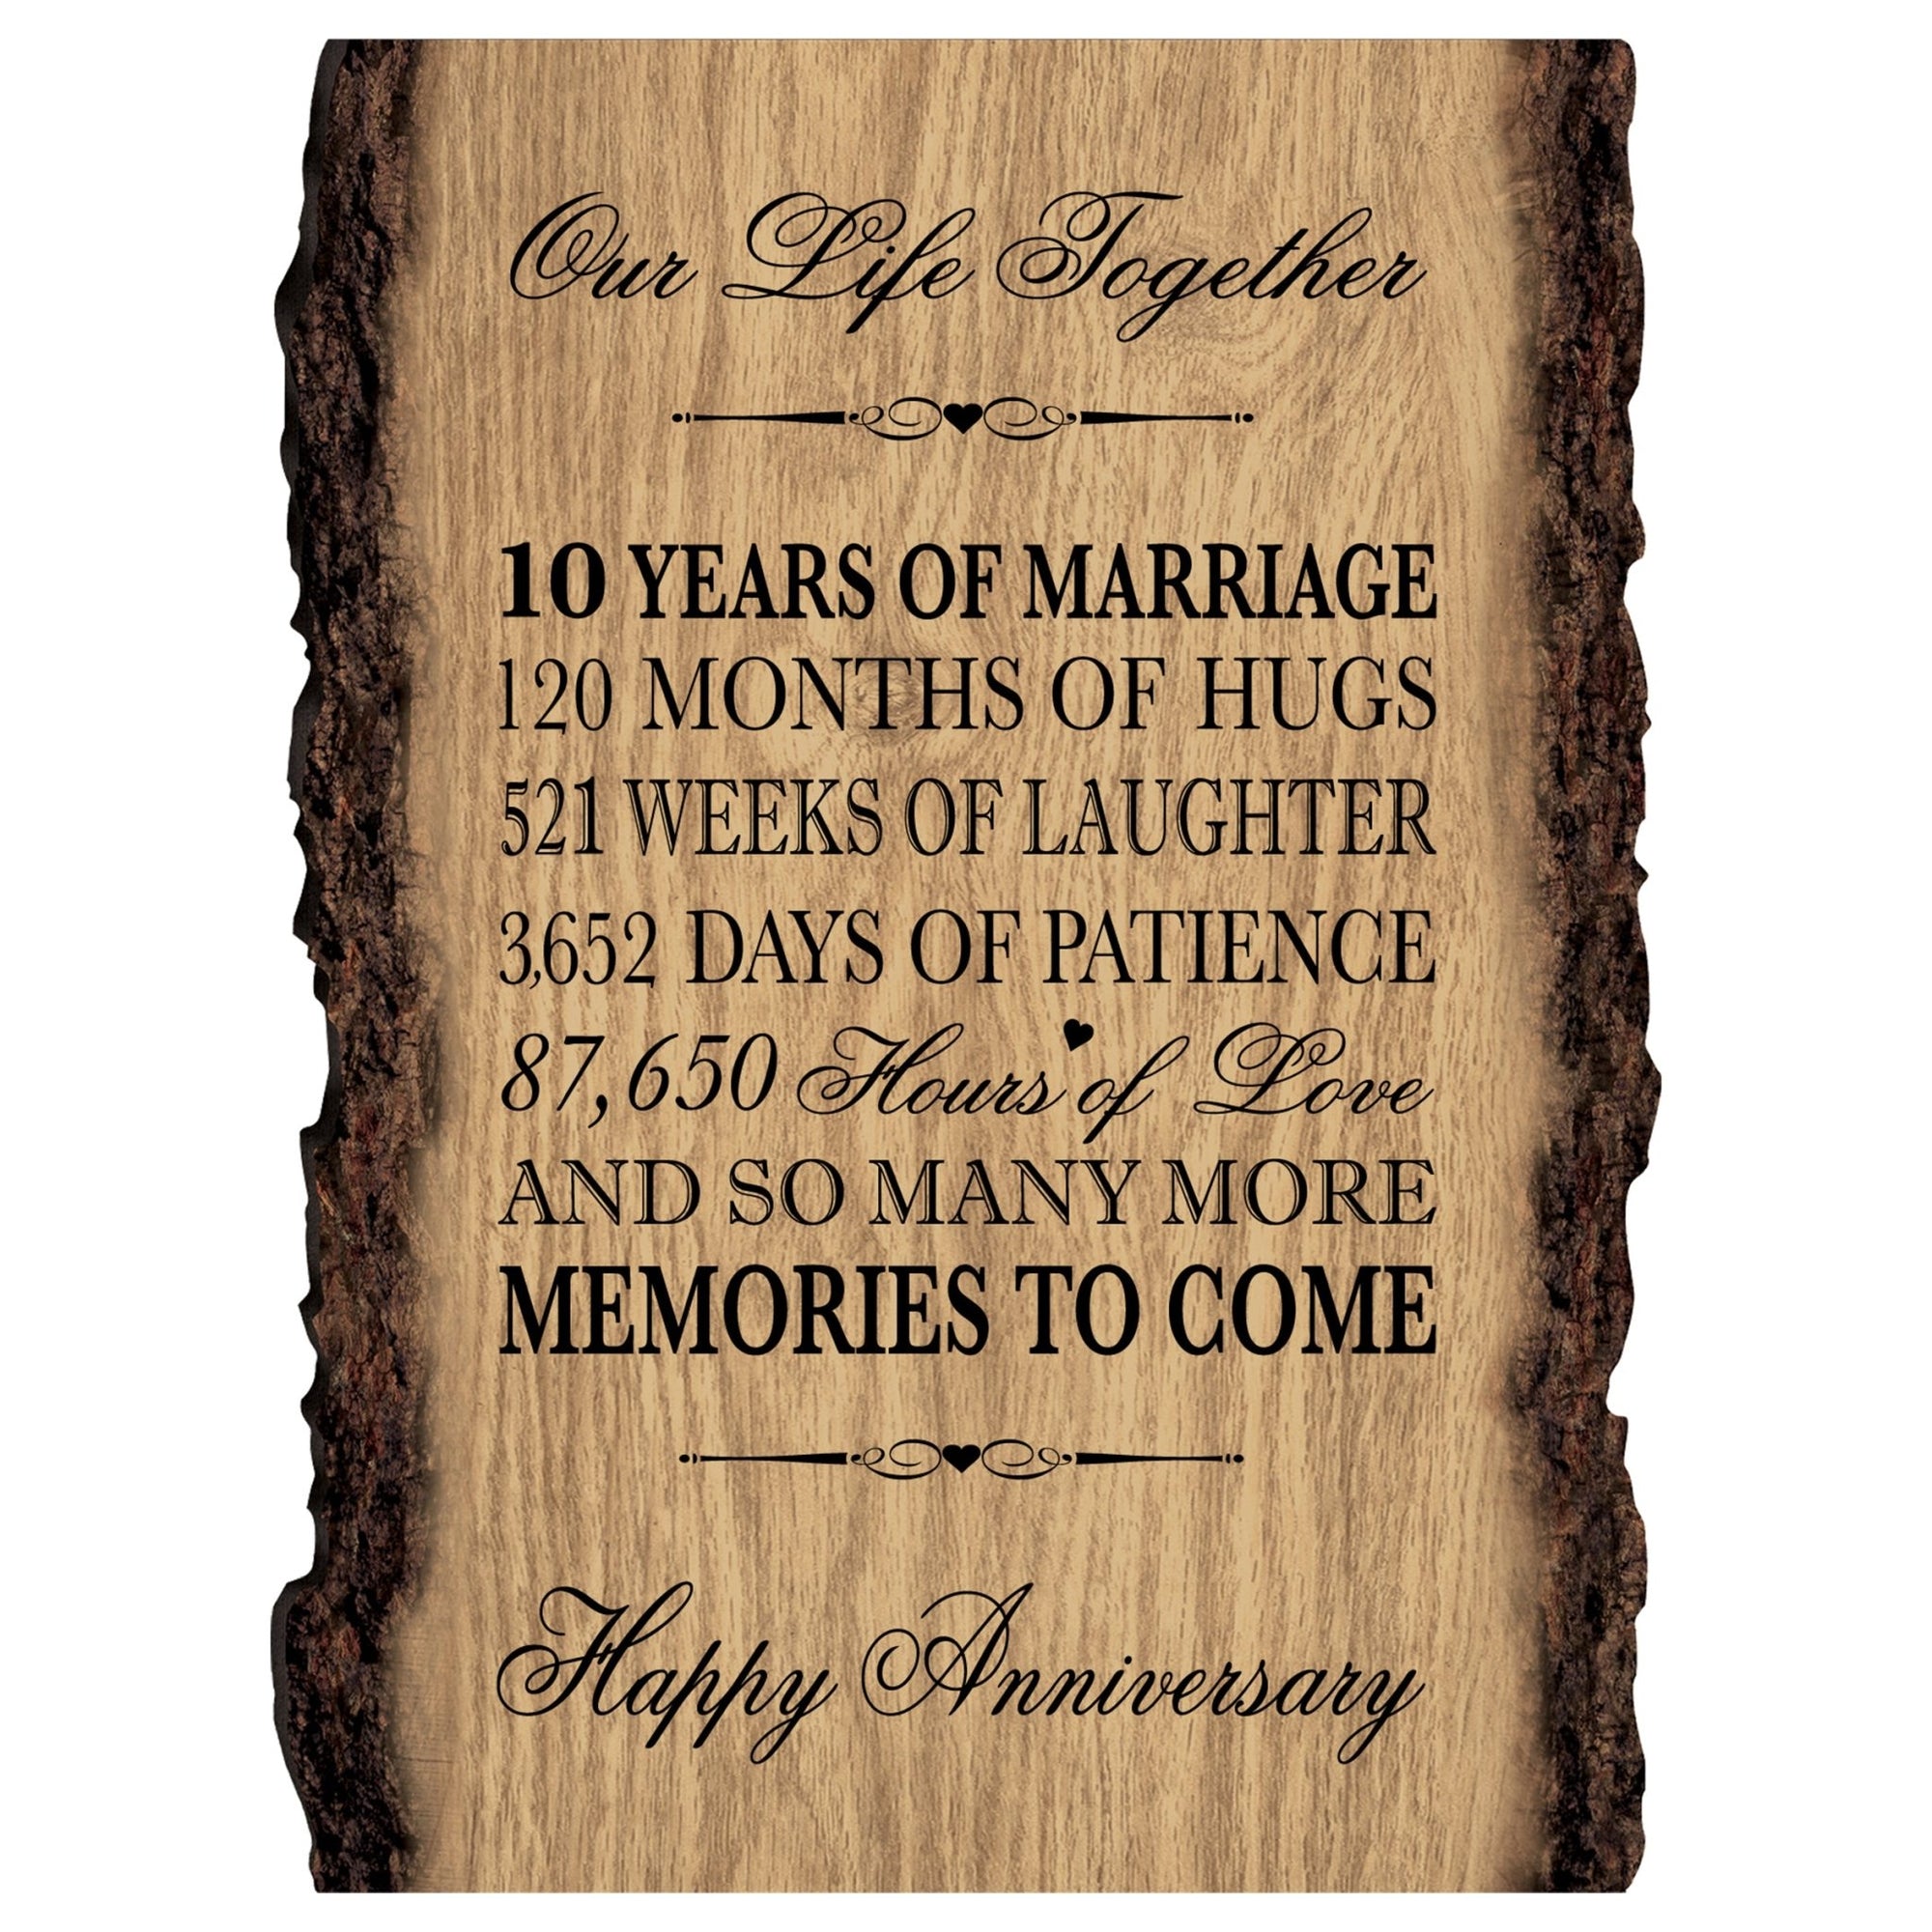 Rustic Wedding Anniversary 9x12 Barky Wall Plaque Gift For Parents, Grandparents New Couple - 10 Years Of Marriage - LifeSong Milestones